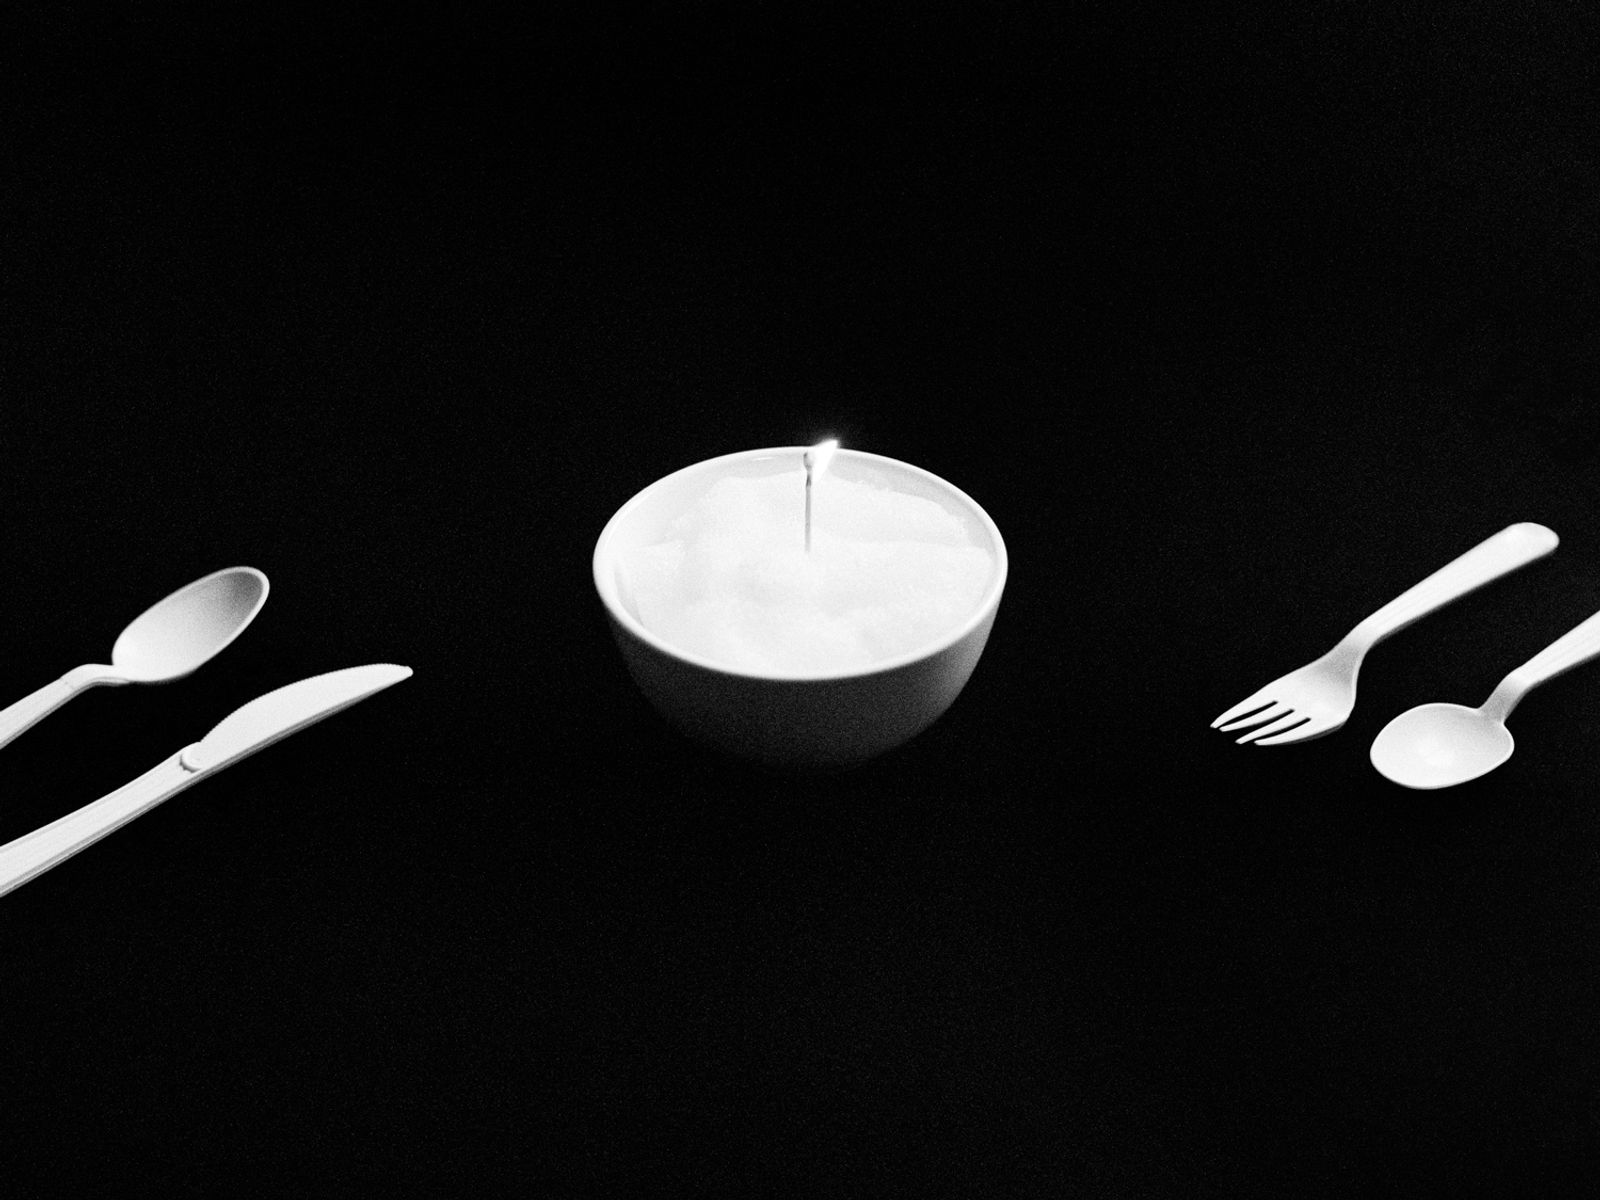 © Su Ji Lee - Meal For One, 2022, 20x16 inches, Archival pigment print